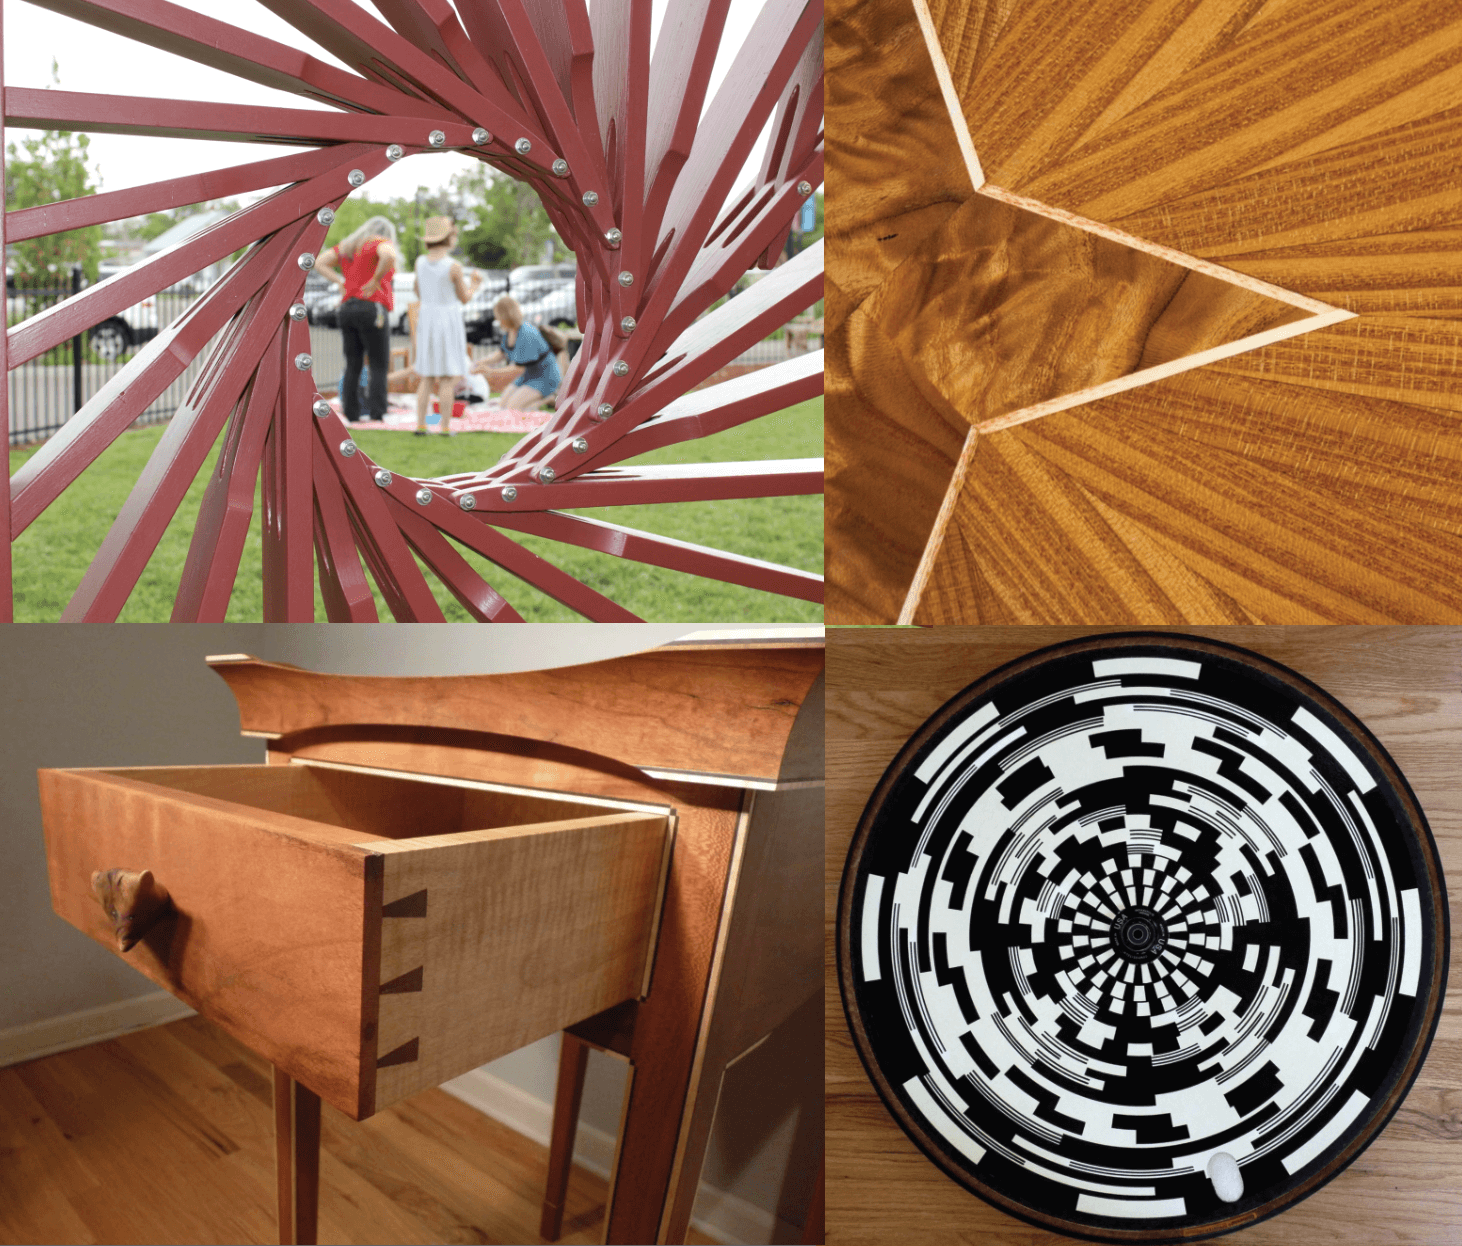 examples of projects from fine woodworking dovetails to black and white bike wheel optical graphic